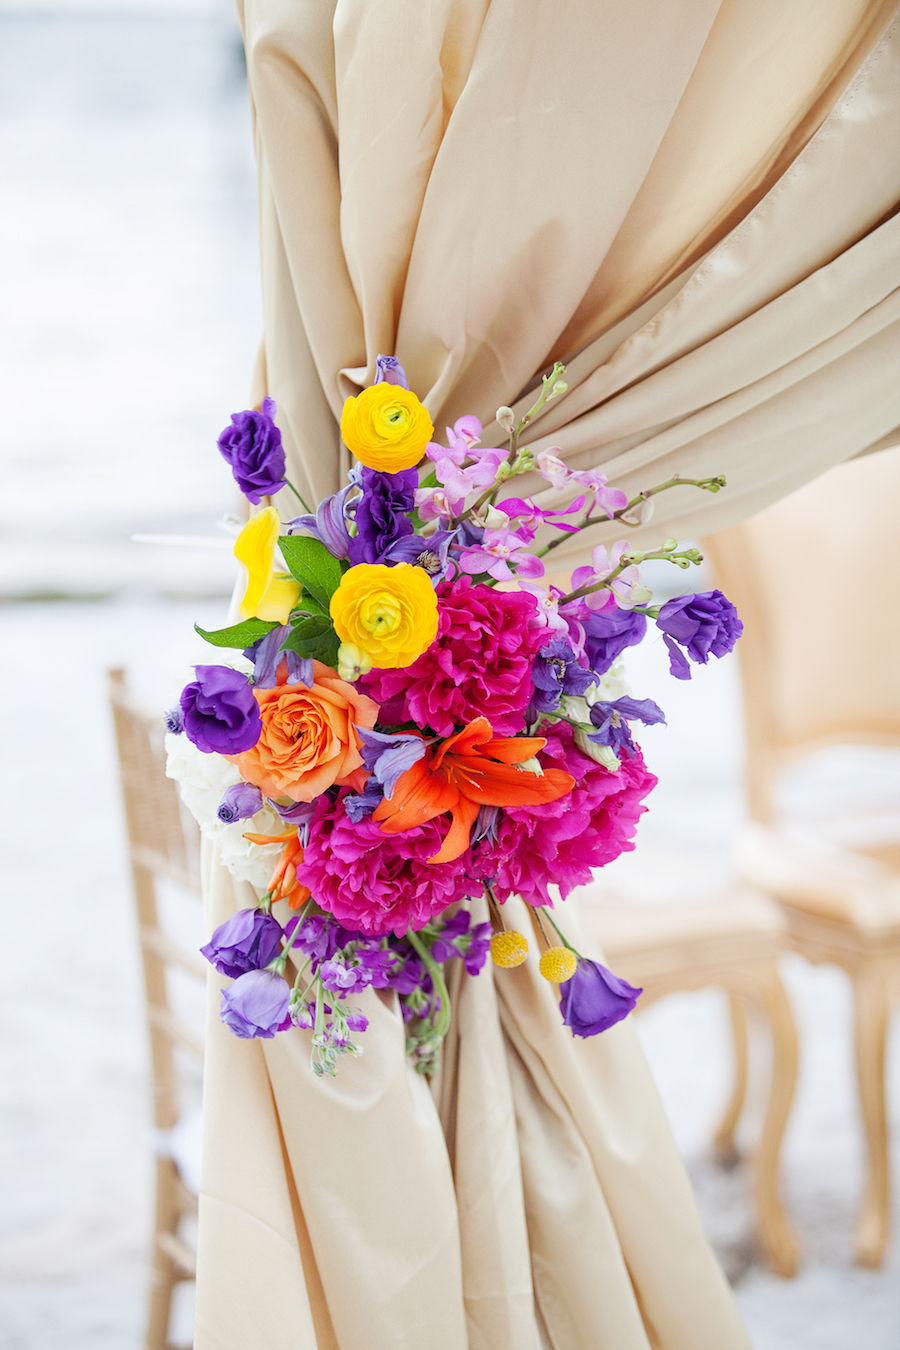 St. Petersburg Wedding Ceremony Floral Decor with Pink, Orange, Purple, and Yellow Flowers | St. Petersburg Wedding Florist Iza's Flowers